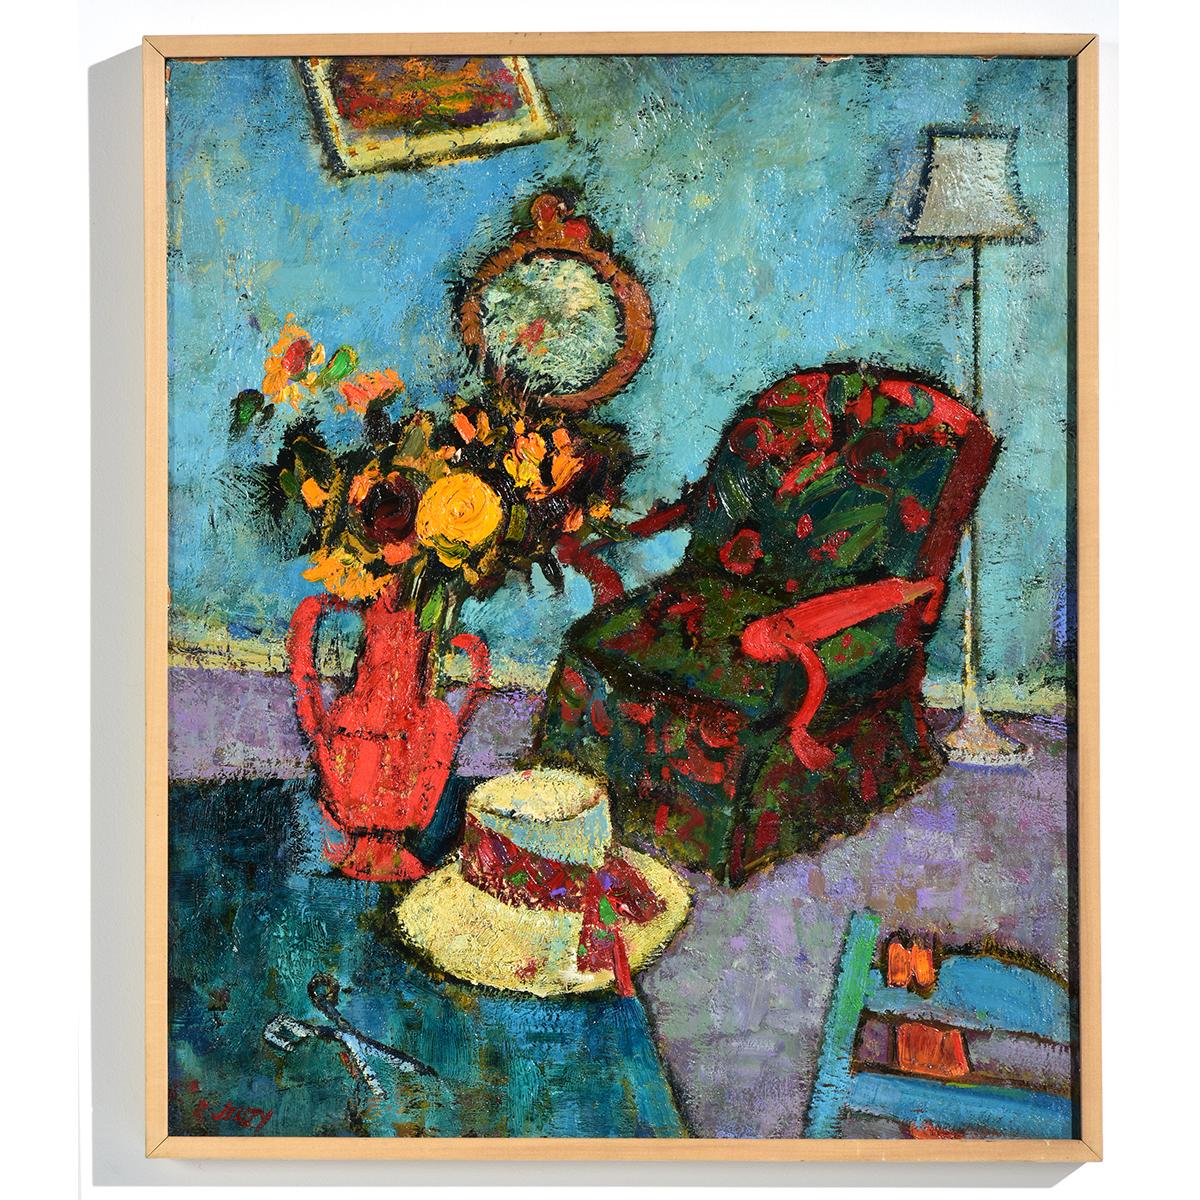 Richard Jerzy Watercolor "Red Chair" Interior with Flowers & Chair